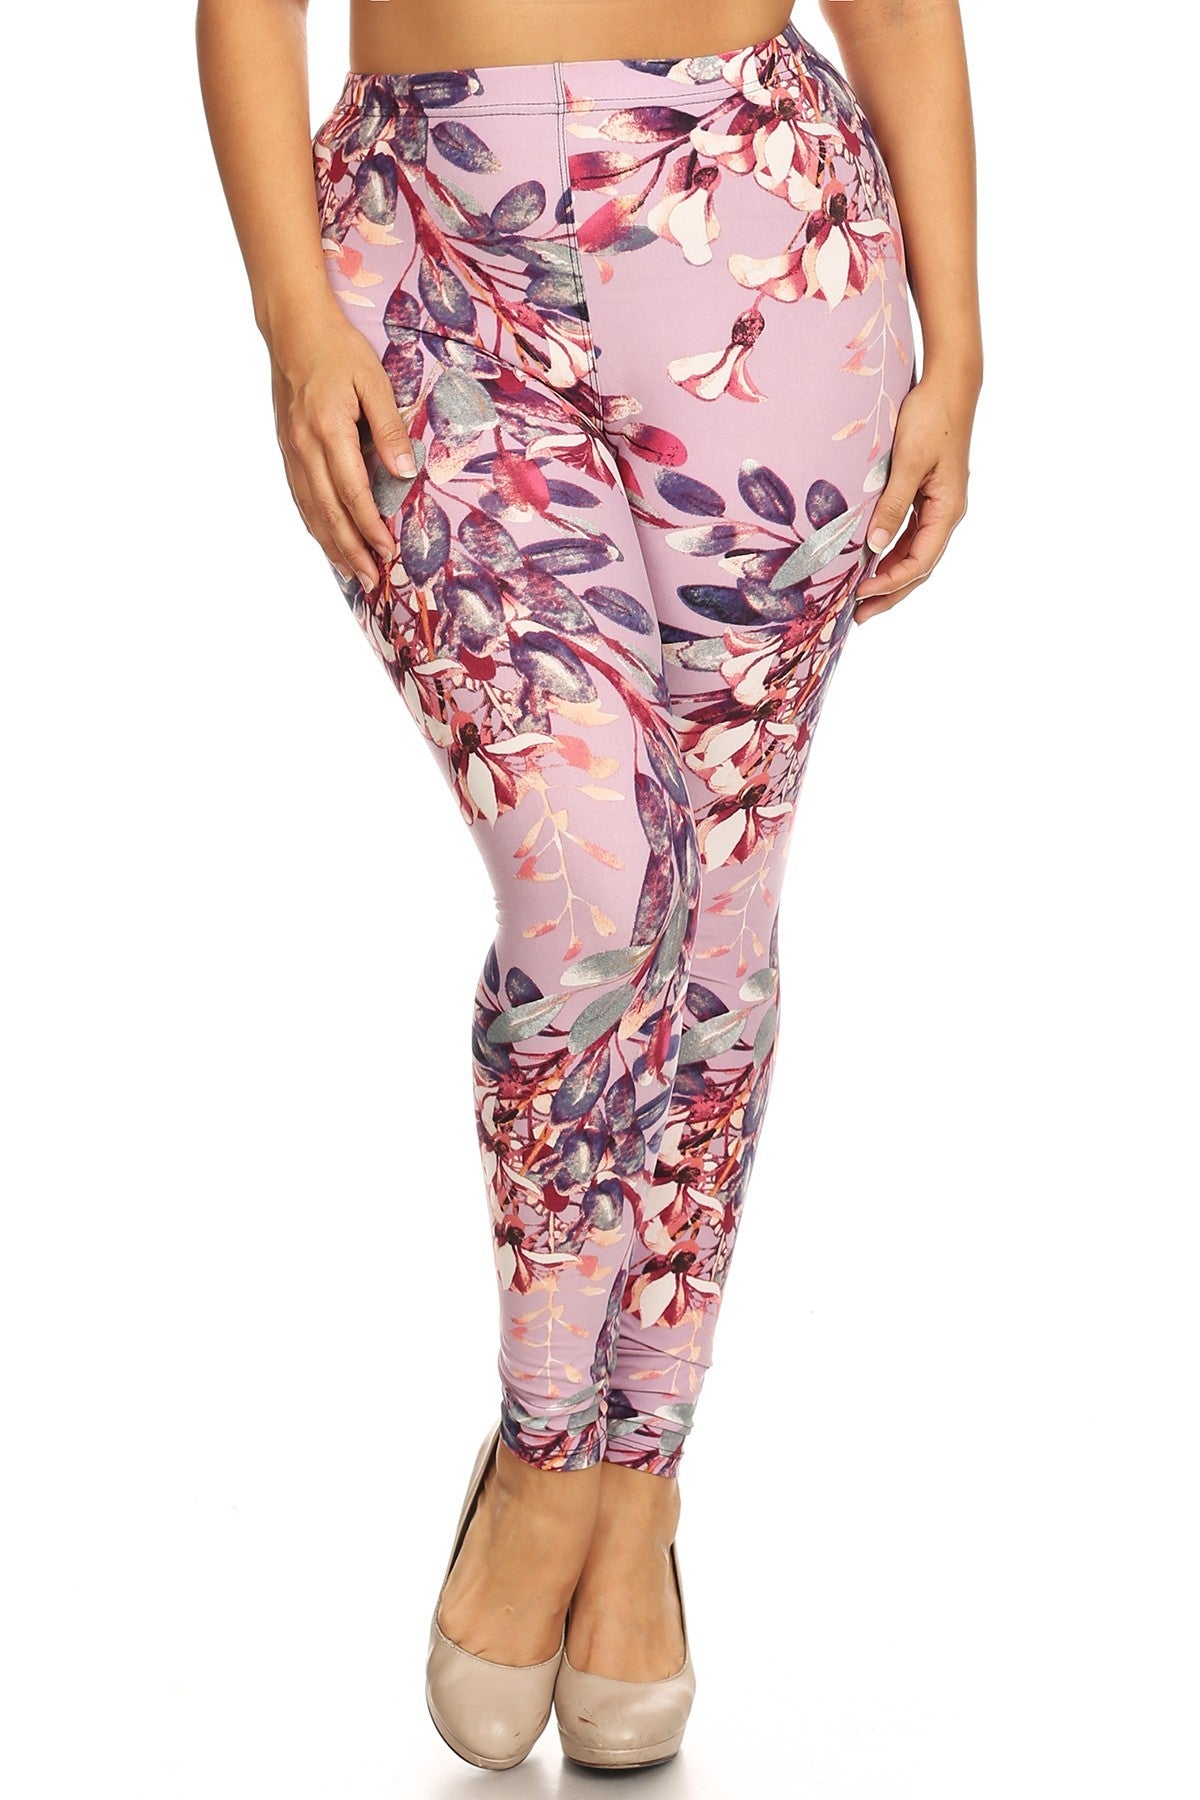 Plus Size Rosy Pink Floral Print, Full Length Leggings In A Slim Fitting Style With A Banded High Waist